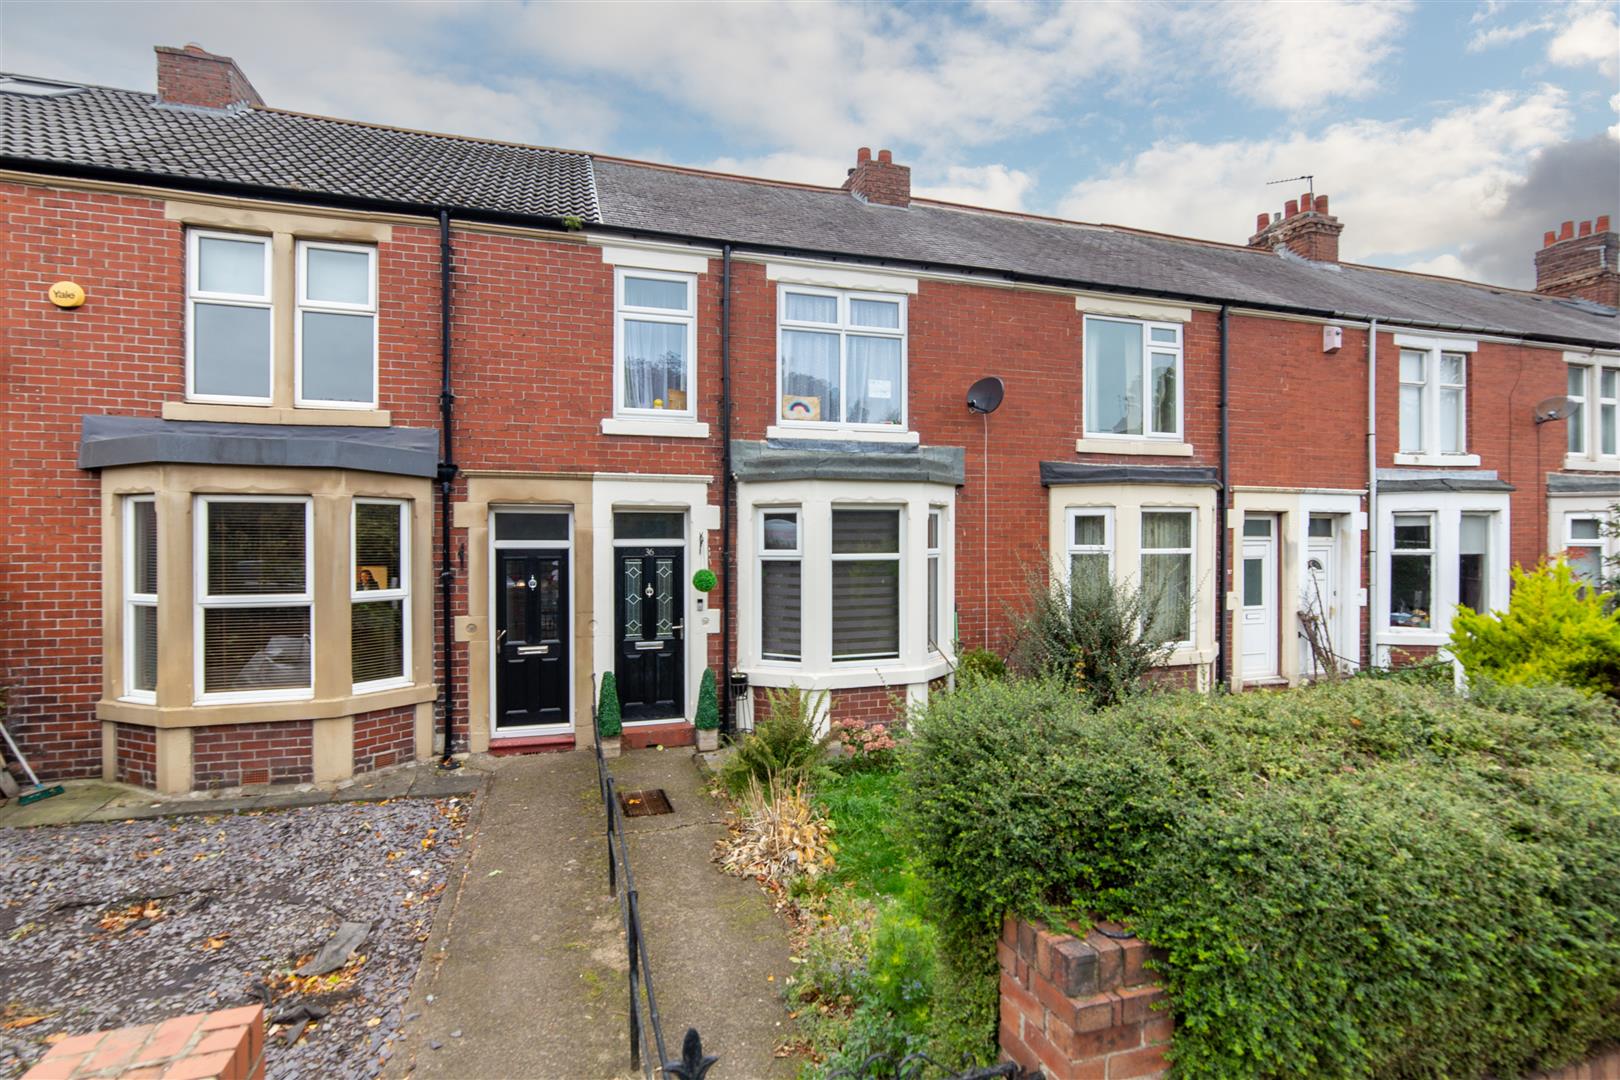 3 bed terraced house for sale in Park View, Newcastle Upon Tyne, NE13